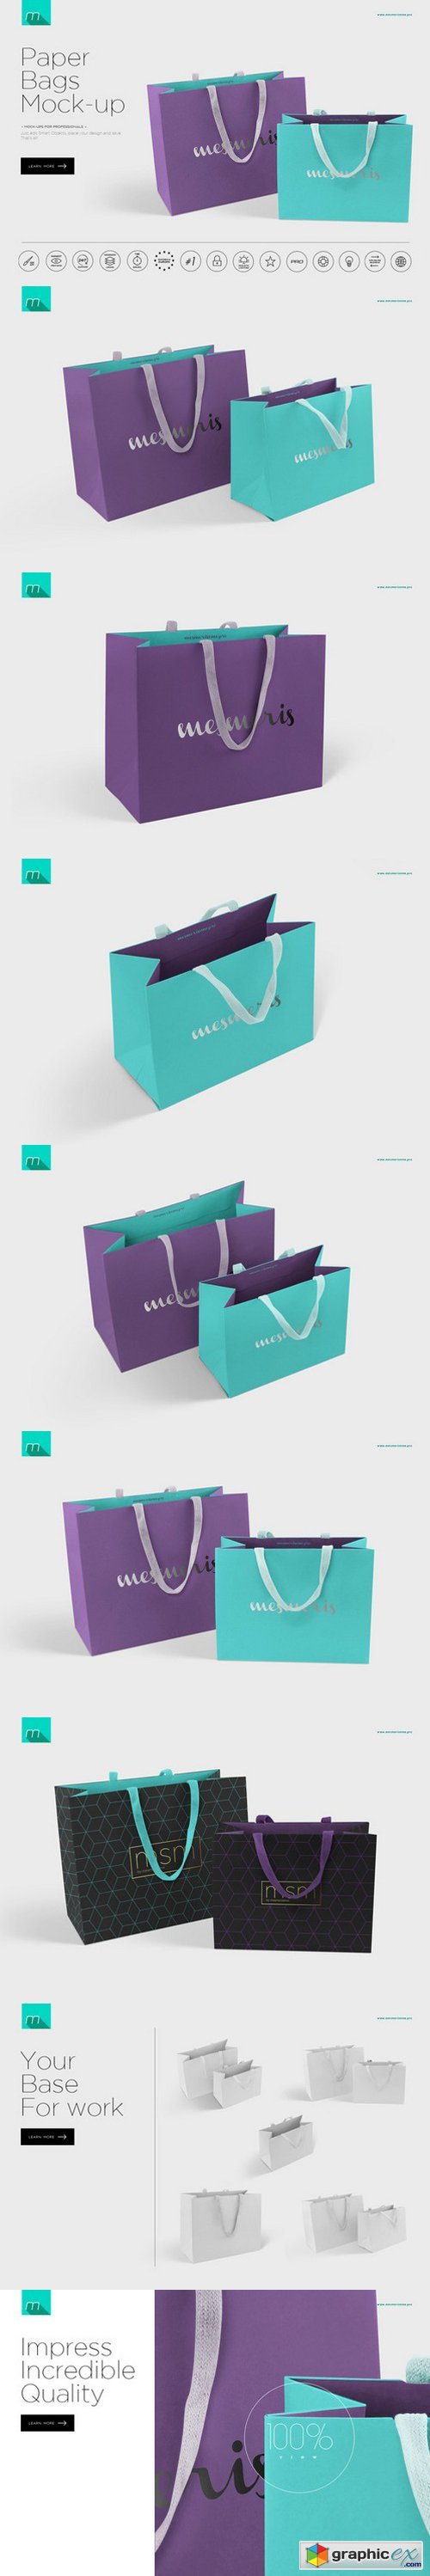 Paper Bags Mock-up